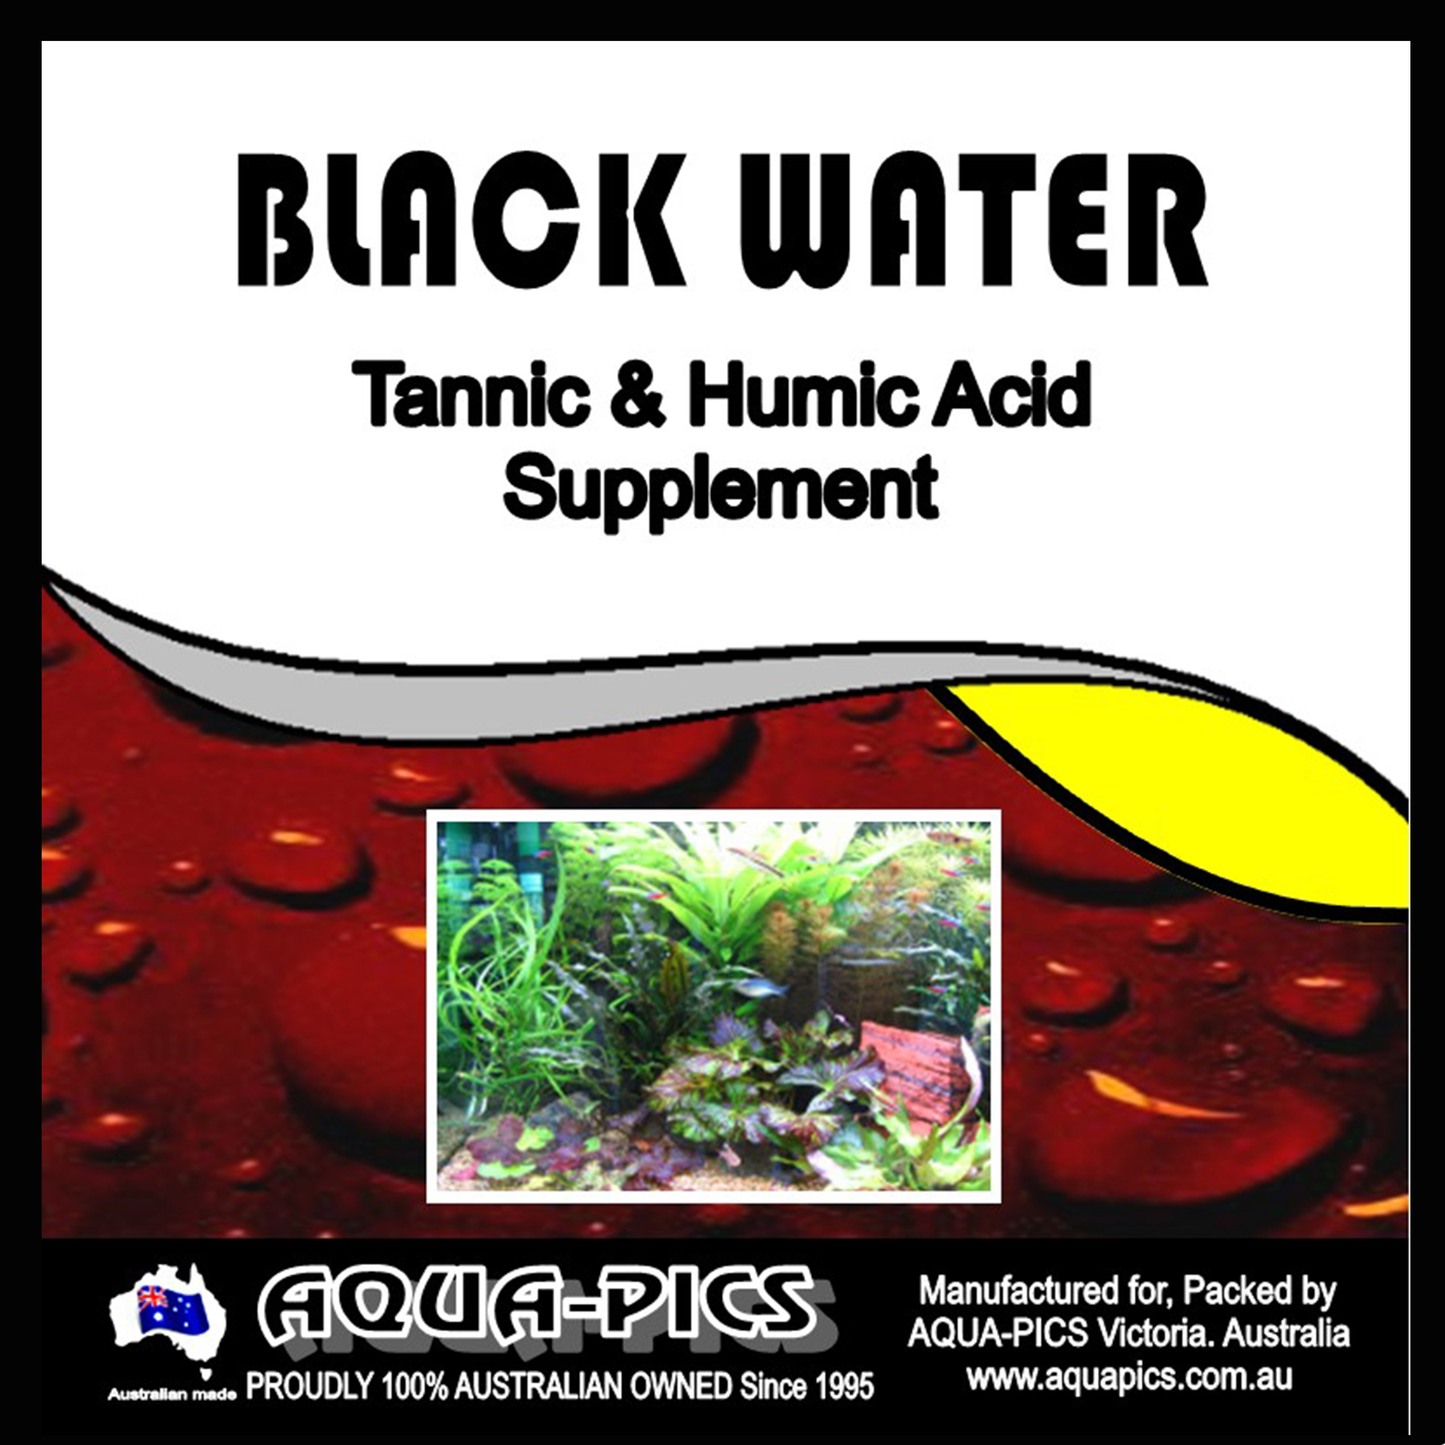 Black Water Extract 1 litre